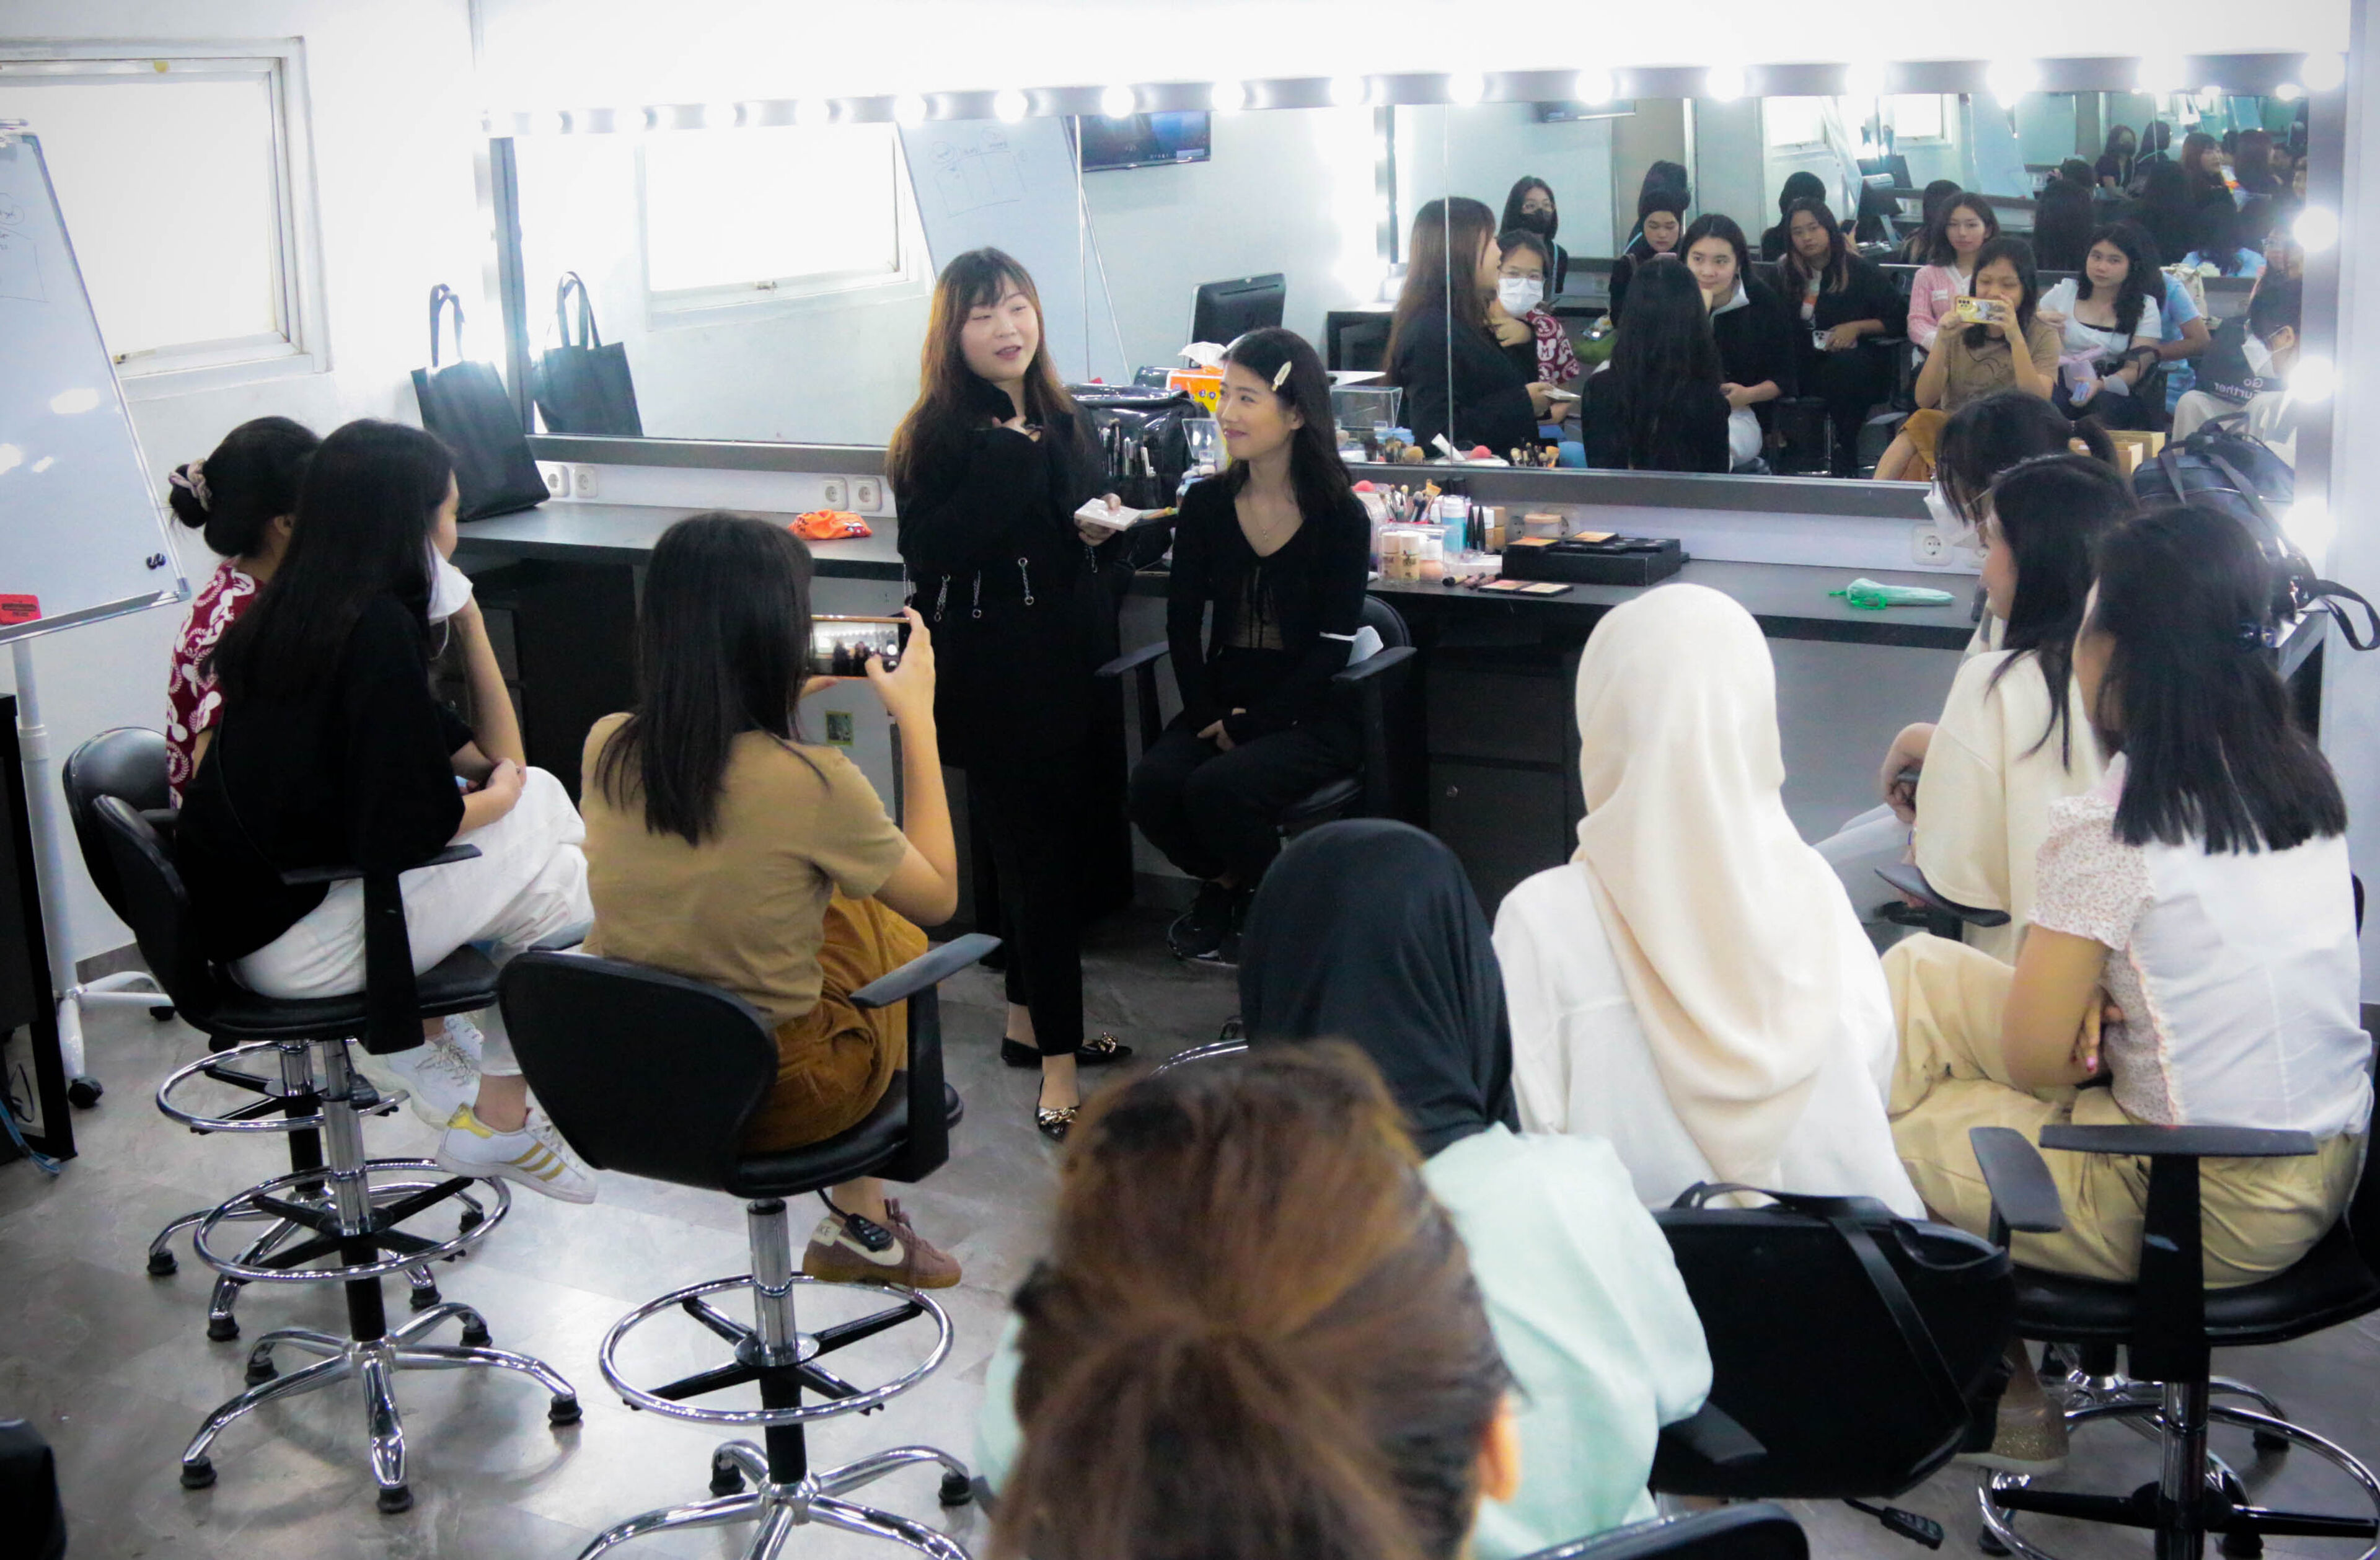 An instructor demonstrates hairstyling techniques to an attentive group of students in a beauty school salon setting, with mirrors reflecting the session.